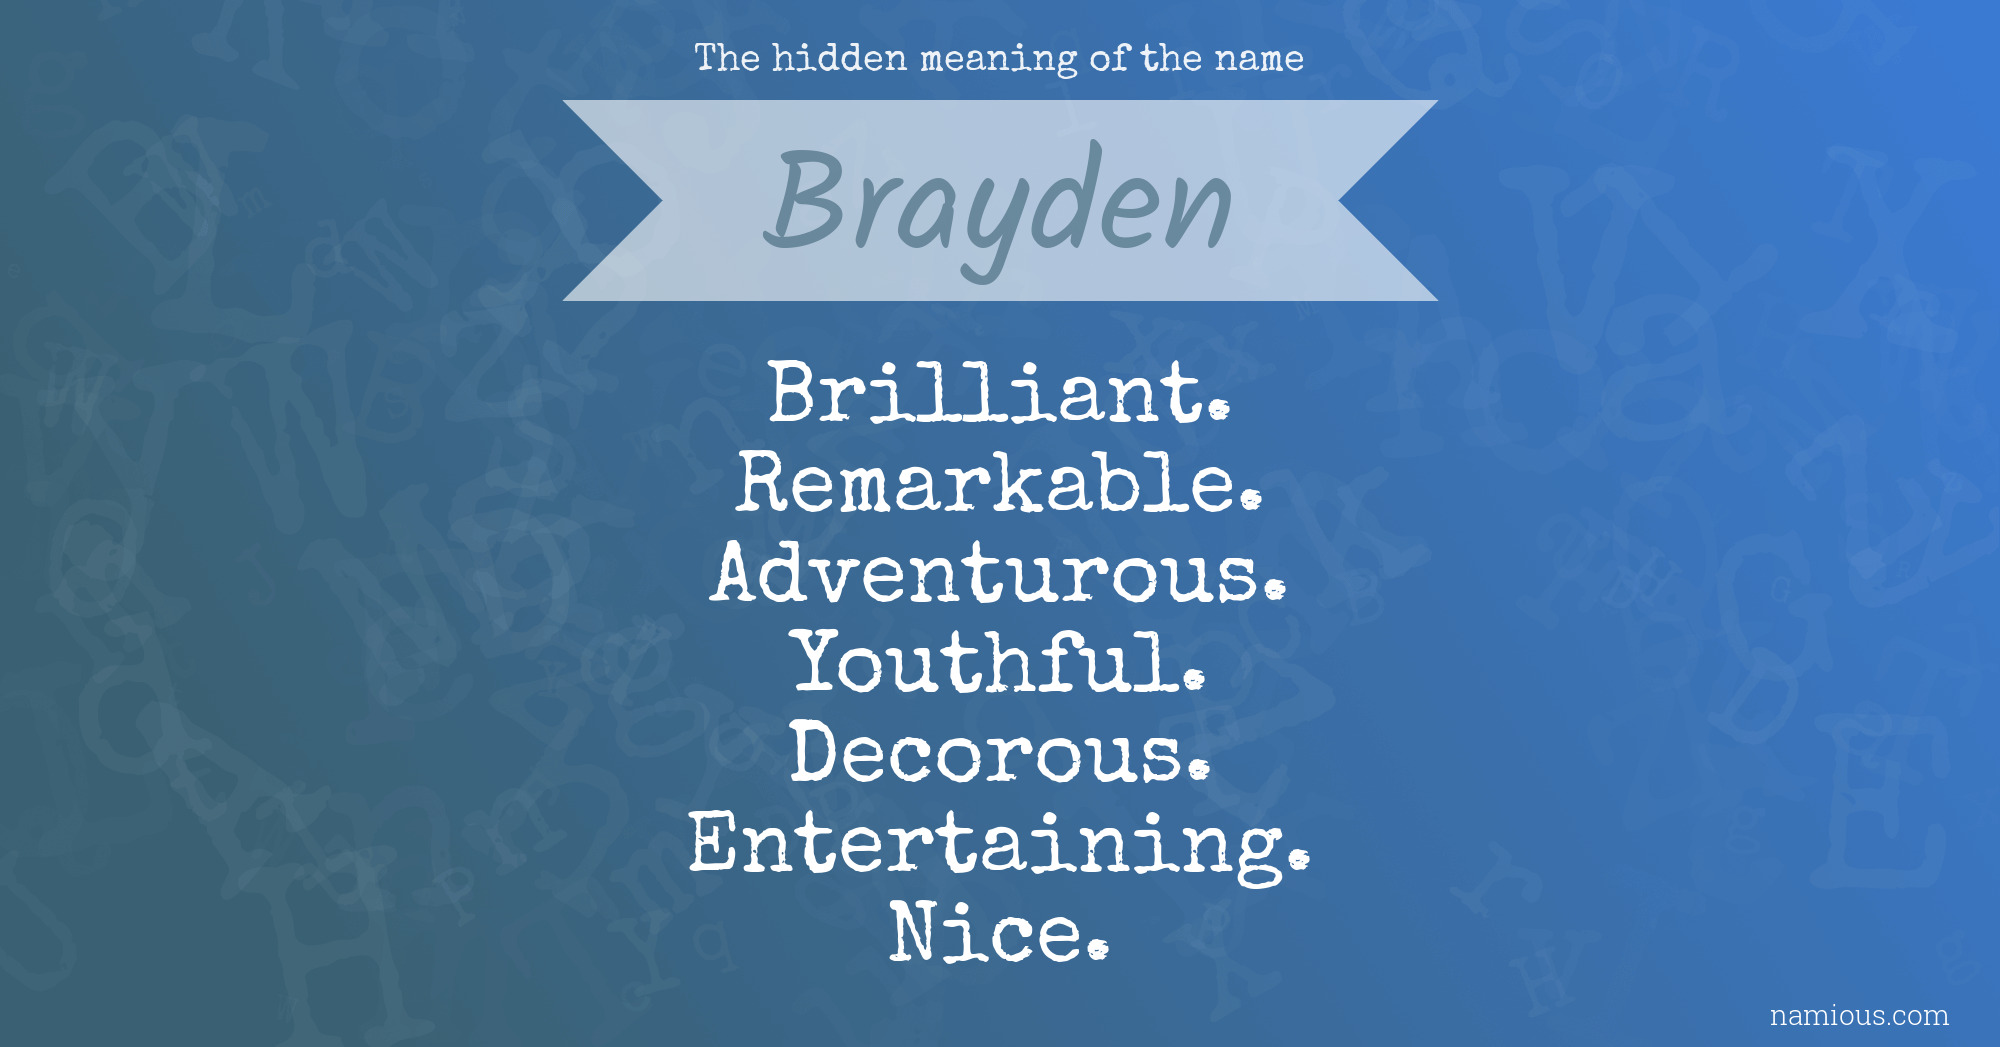 The hidden meaning of the name Brayden